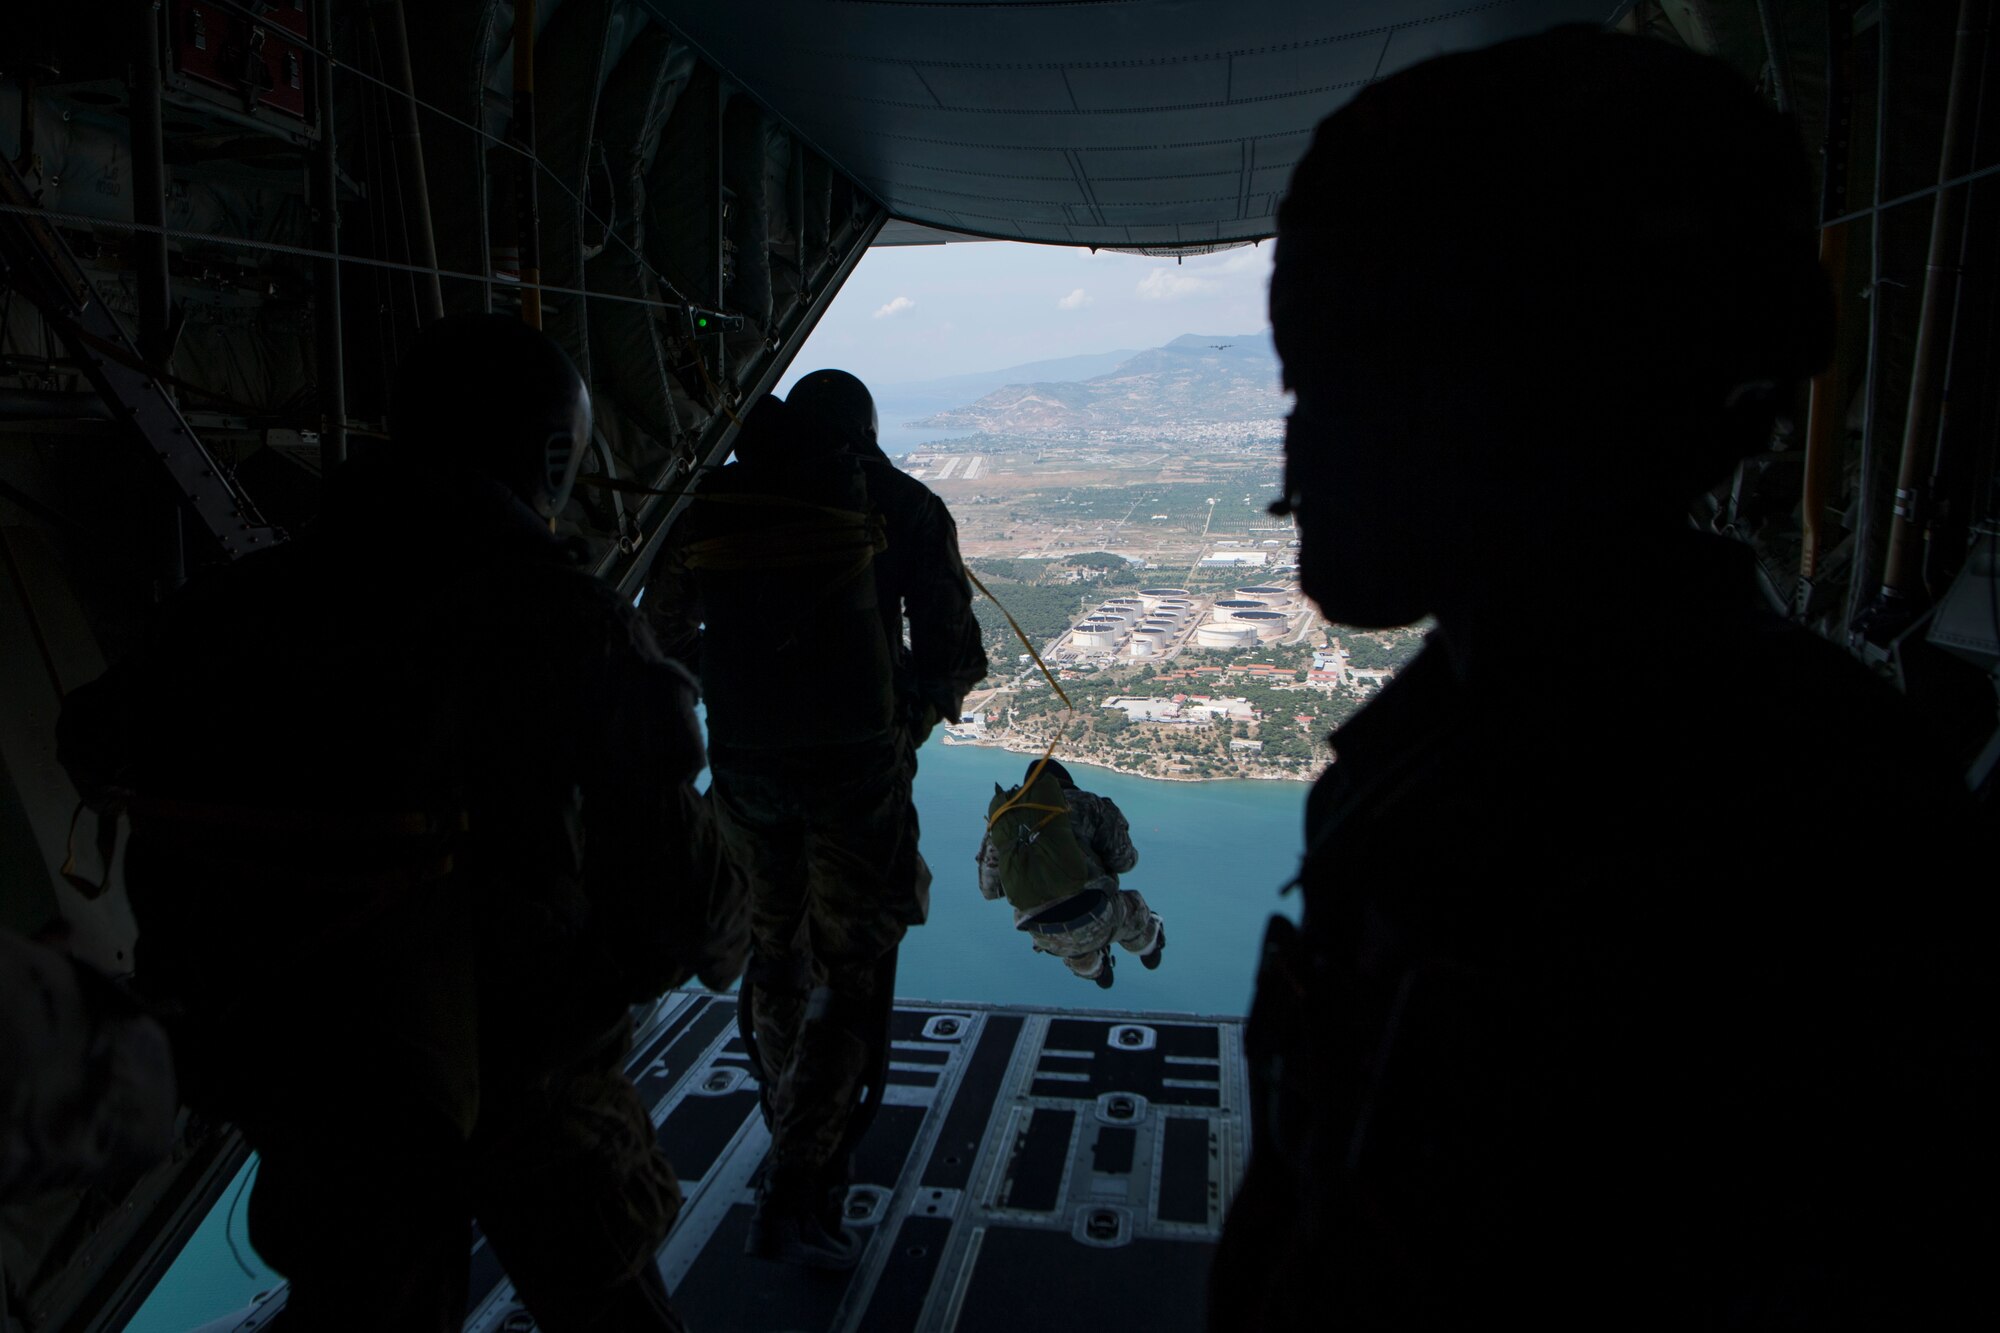 U.S. Army Sgt. Onnie Conyer (right), 21st Theater Sustainment Command 5th Quartermaster Company jumpmaster, watches as Hellenic paratroopers jump out of a U.S. Air Force C-130J Super Hercules during an exercise Stolen Cerberus V training mission in the skies near Elefsis Air Base, Greece, May 9, 2018. Conyer was responsible for verifying all jumpers were prepared for the jump. (U.S. Air Force photo by Senior Airman Devin M. Rumbaugh)